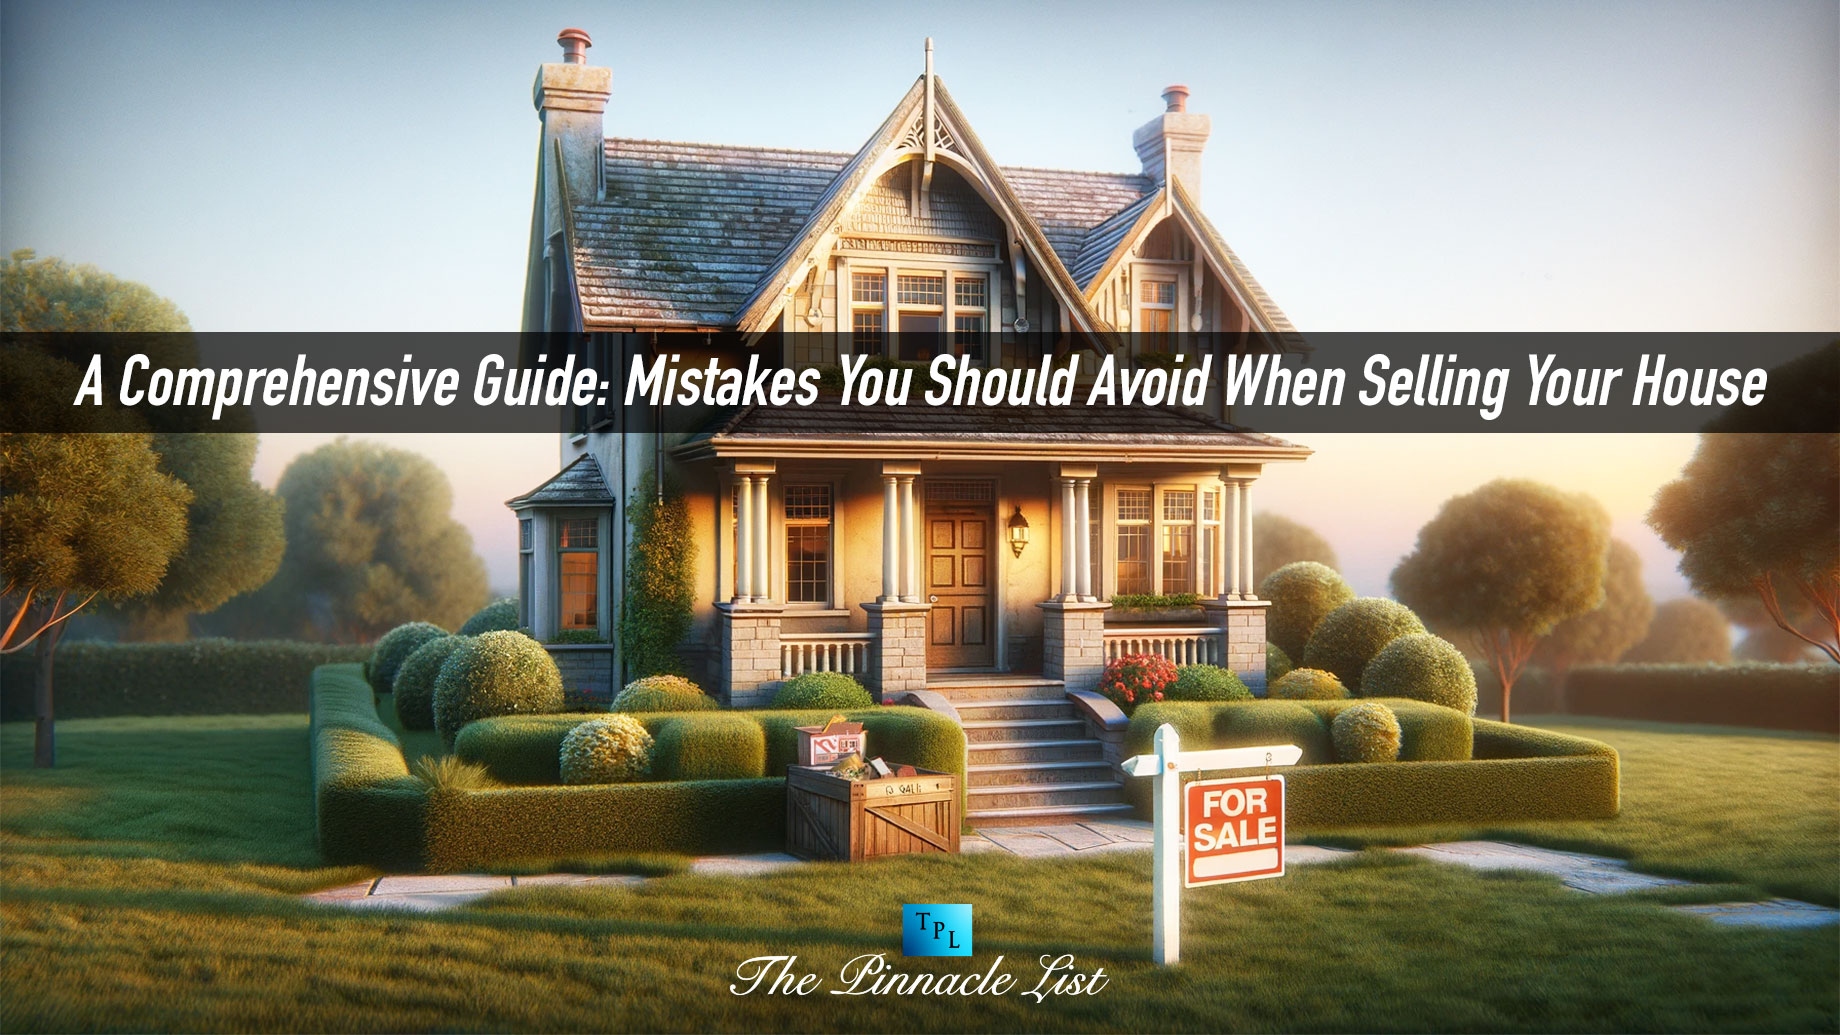 A Comprehensive Guide: Mistakes You Should Avoid When Selling Your House